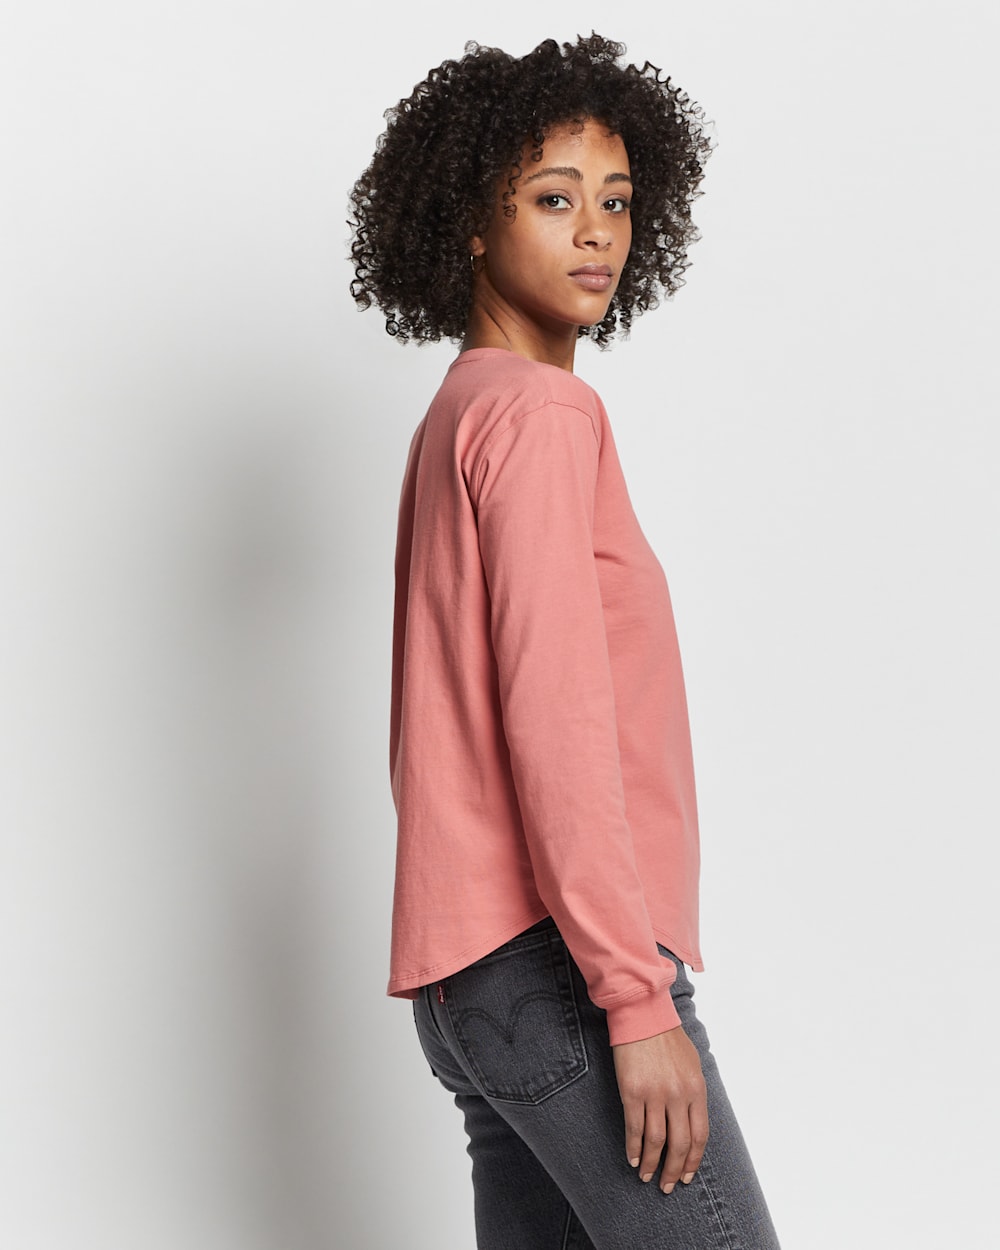 ALTERNATE VIEW OF WOMEN'S LONG-SLEEVE DESCHUTES TEE IN FADED ROSE image number 3